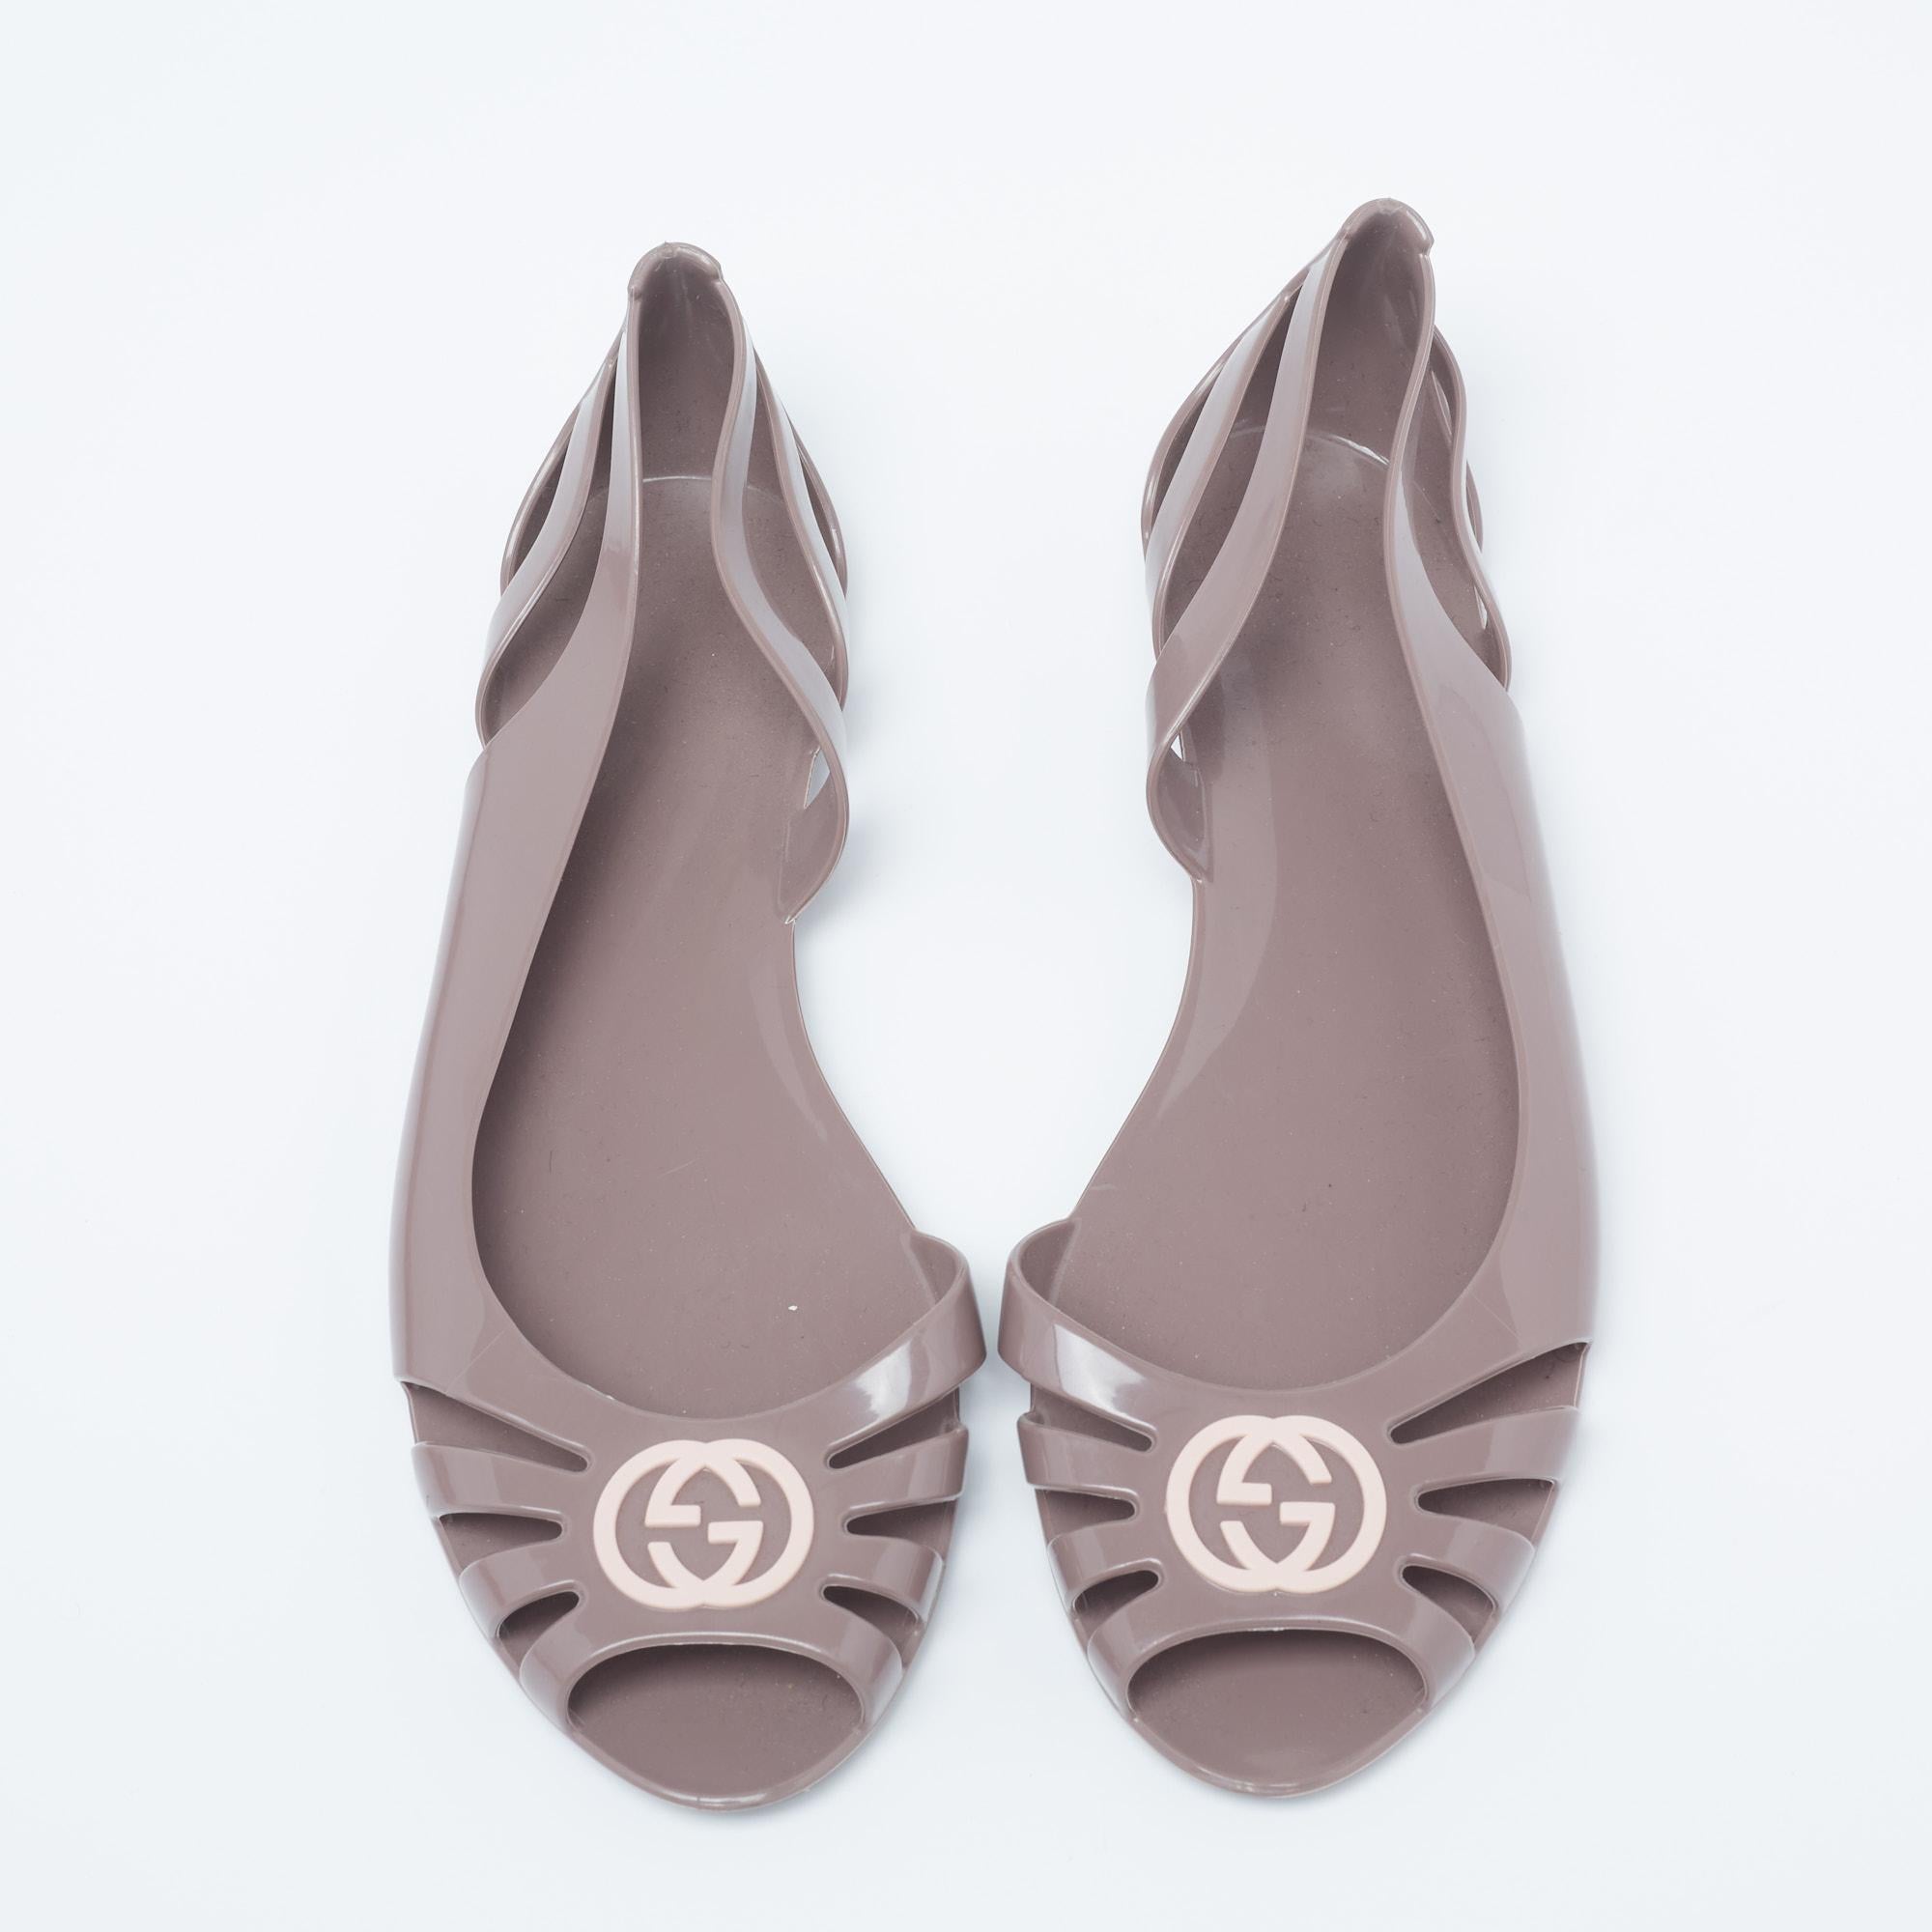 With a perfectly crafted d'Orsay cut, these Gucci rubber flats come enriched with practical details. They are easy to slide into and the interlocking 'GG' motif on the peep toes offers the pair a recognizable accent.

Includes: Original Dustbag